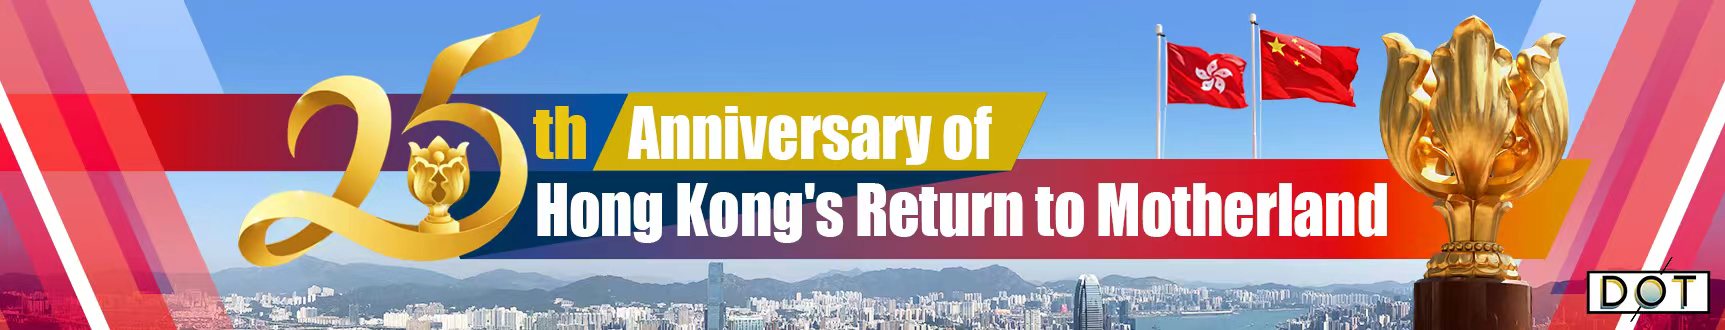 Celebrate the 25th anniversary of Hong Kong's return to the motherland